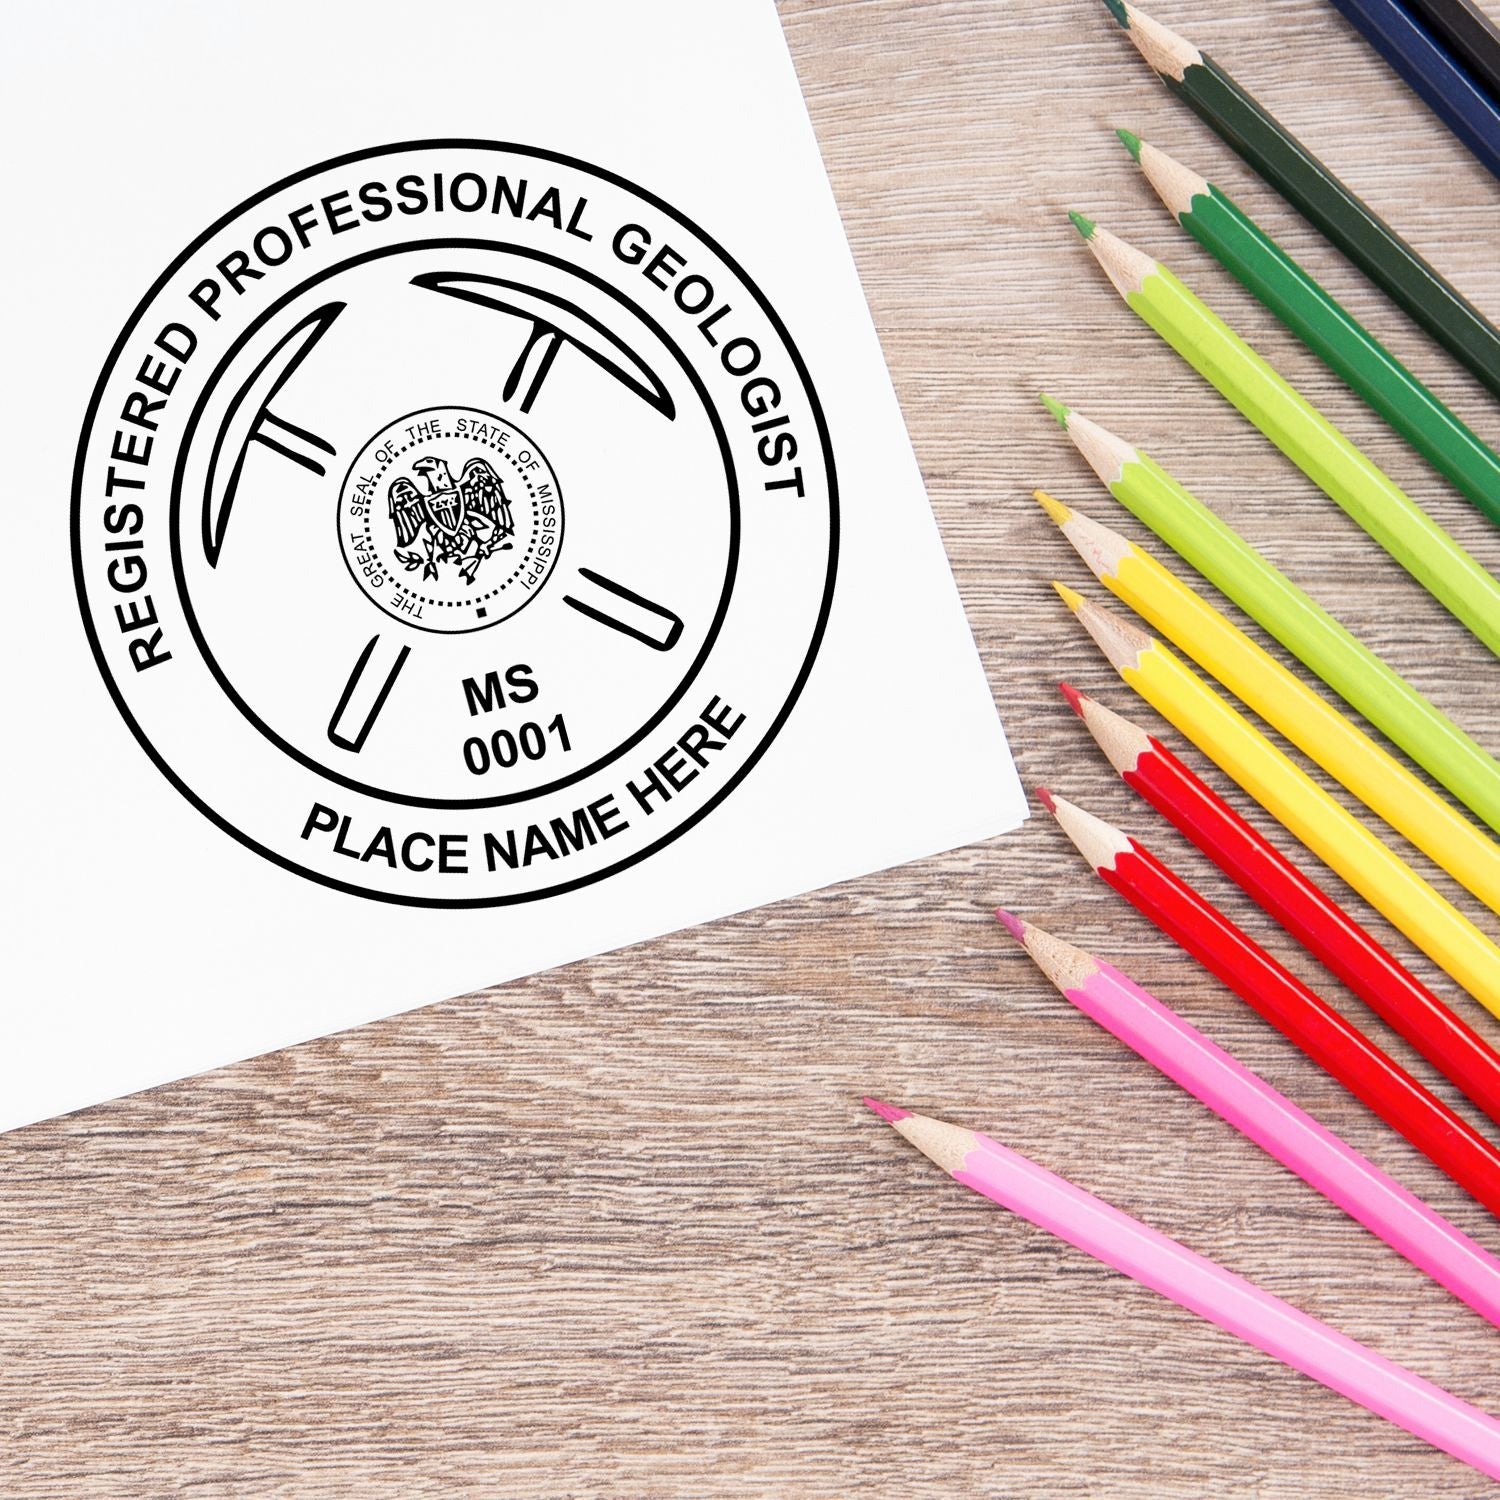 The Mississippi Professional Geologist Seal Stamp stamp impression comes to life with a crisp, detailed image stamped on paper - showcasing true professional quality.